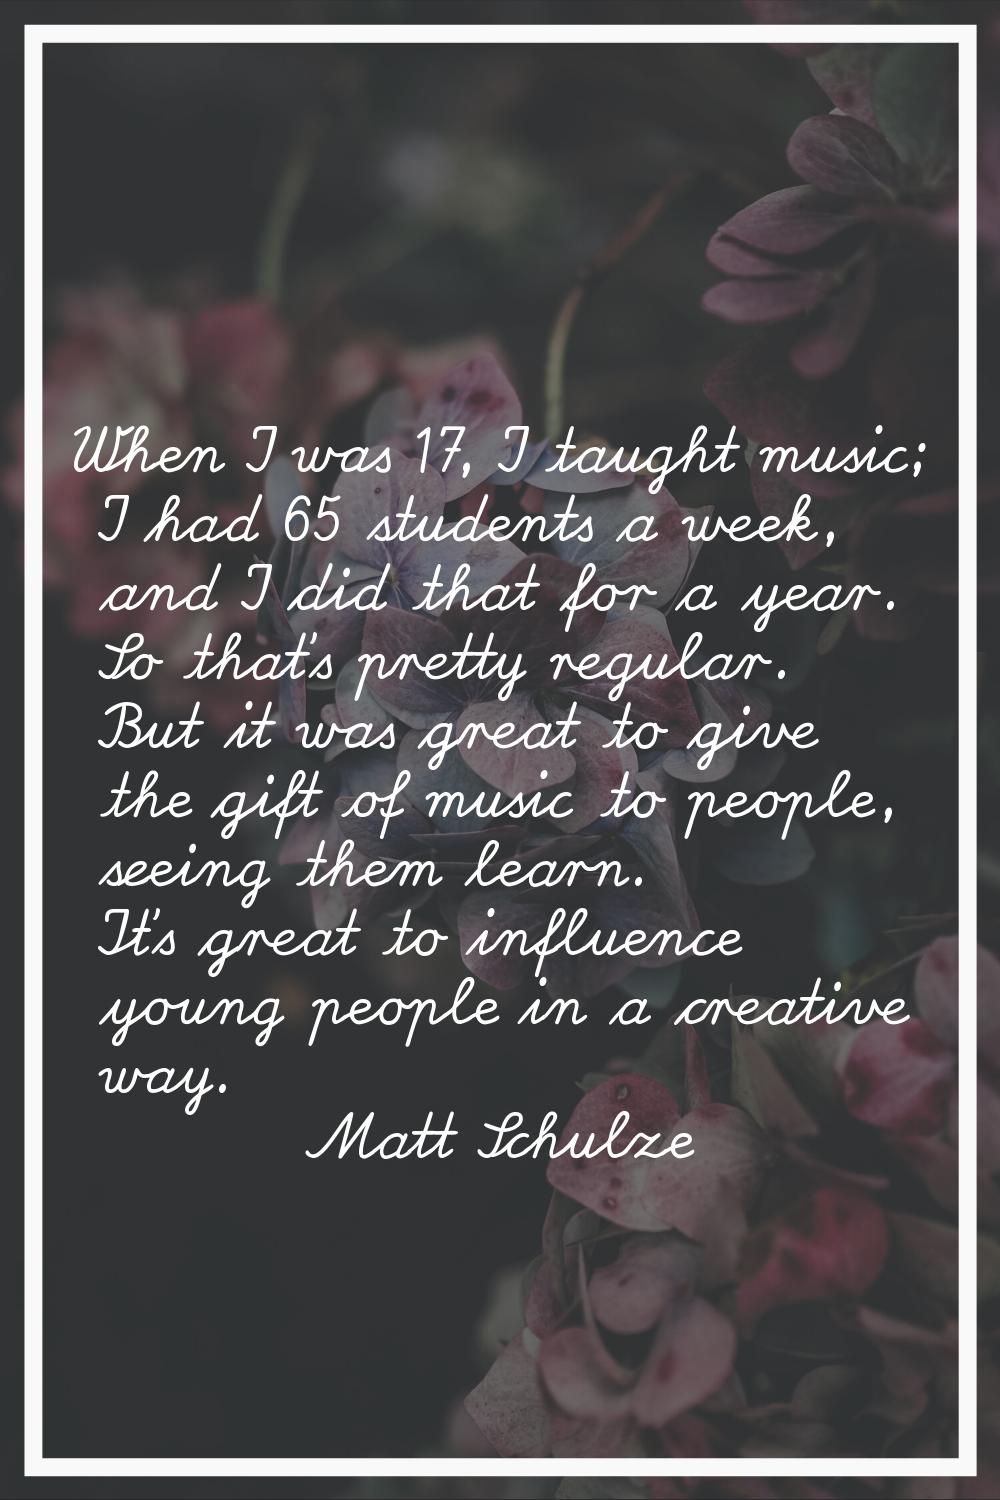 When I was 17, I taught music; I had 65 students a week, and I did that for a year. So that's prett